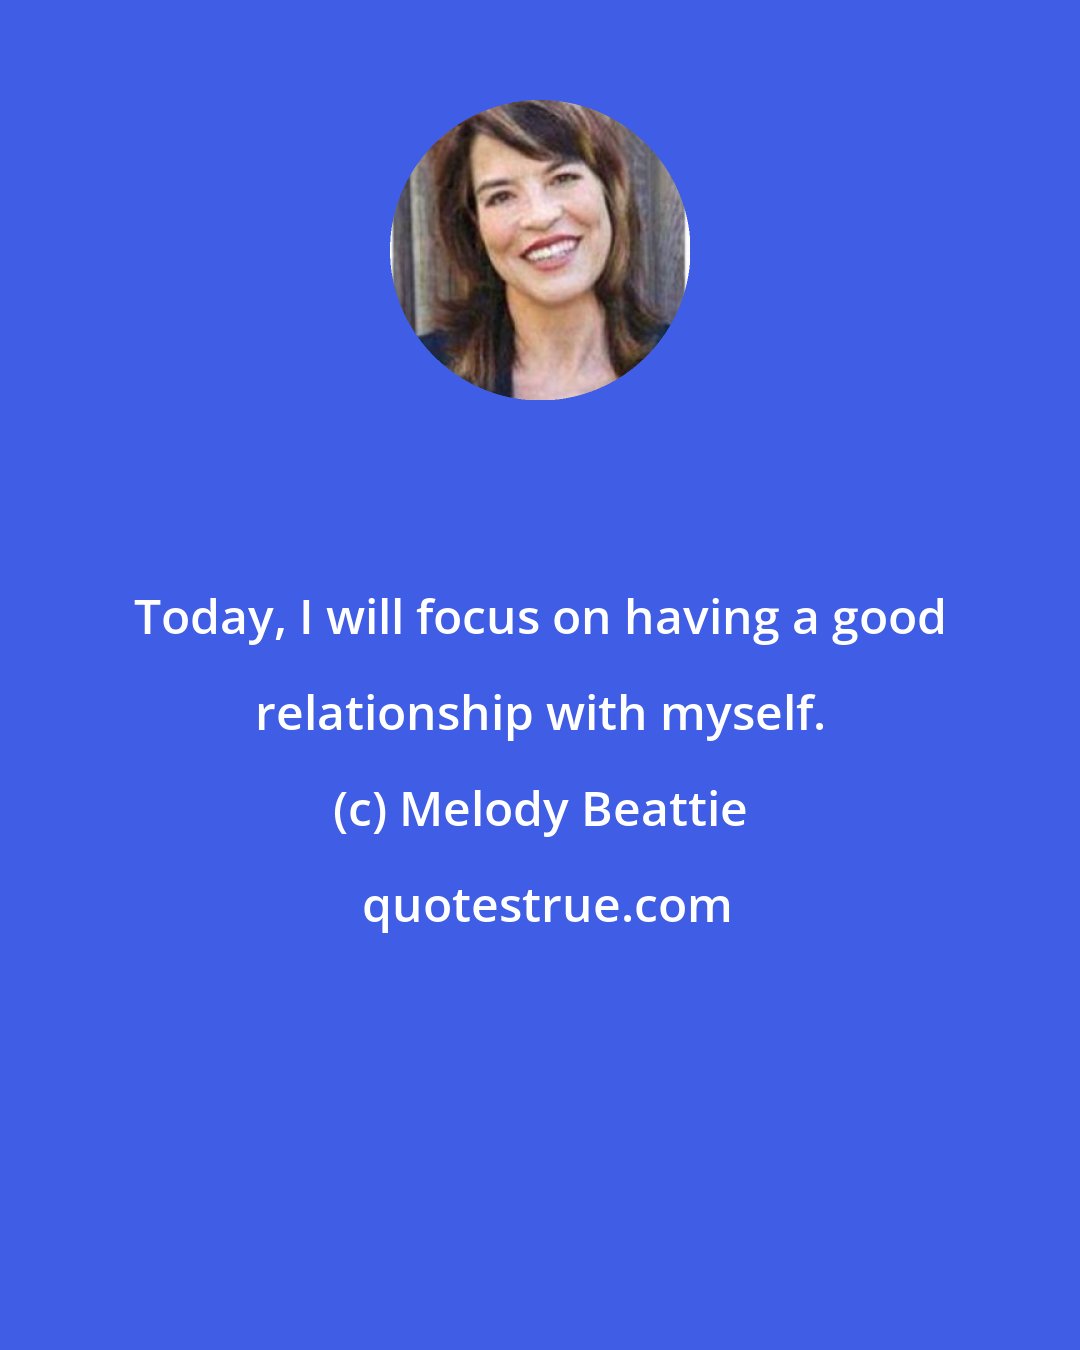 Melody Beattie: Today, I will focus on having a good relationship with myself.